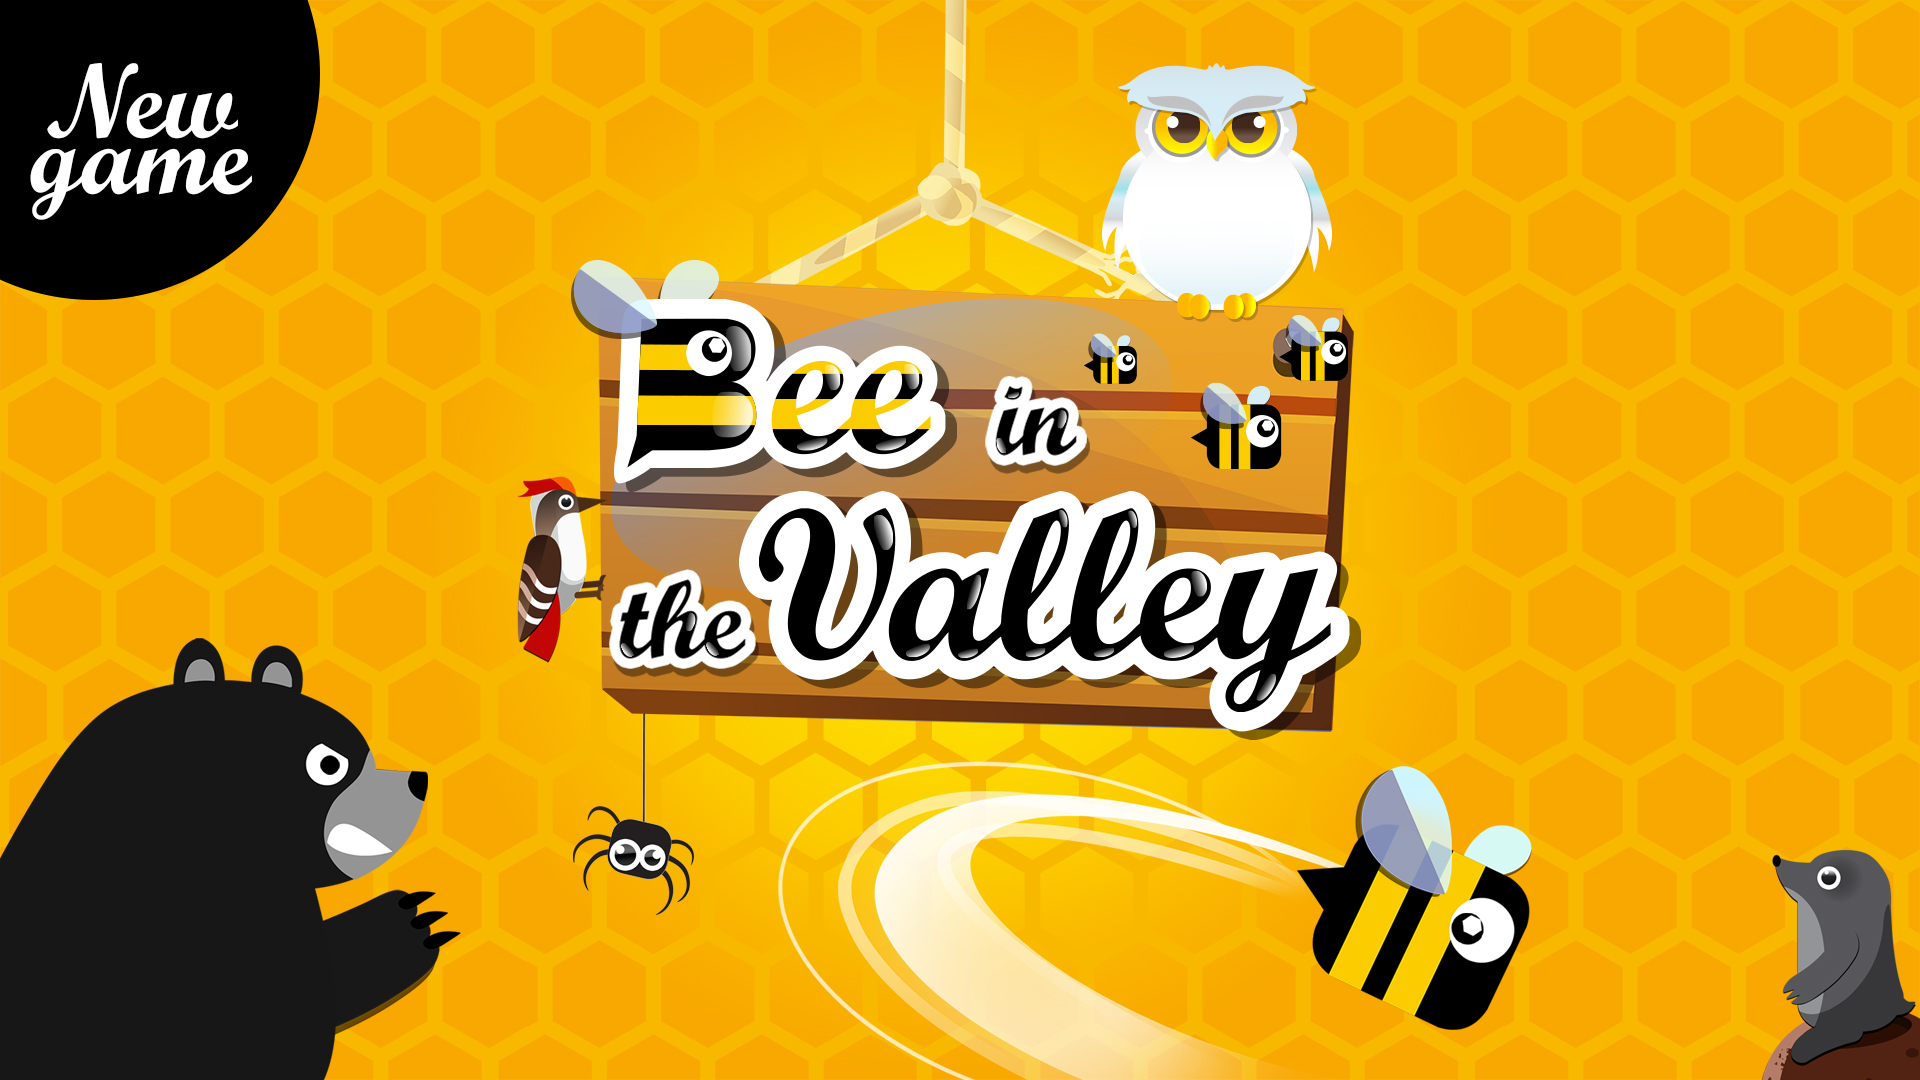 Bee in The Valley